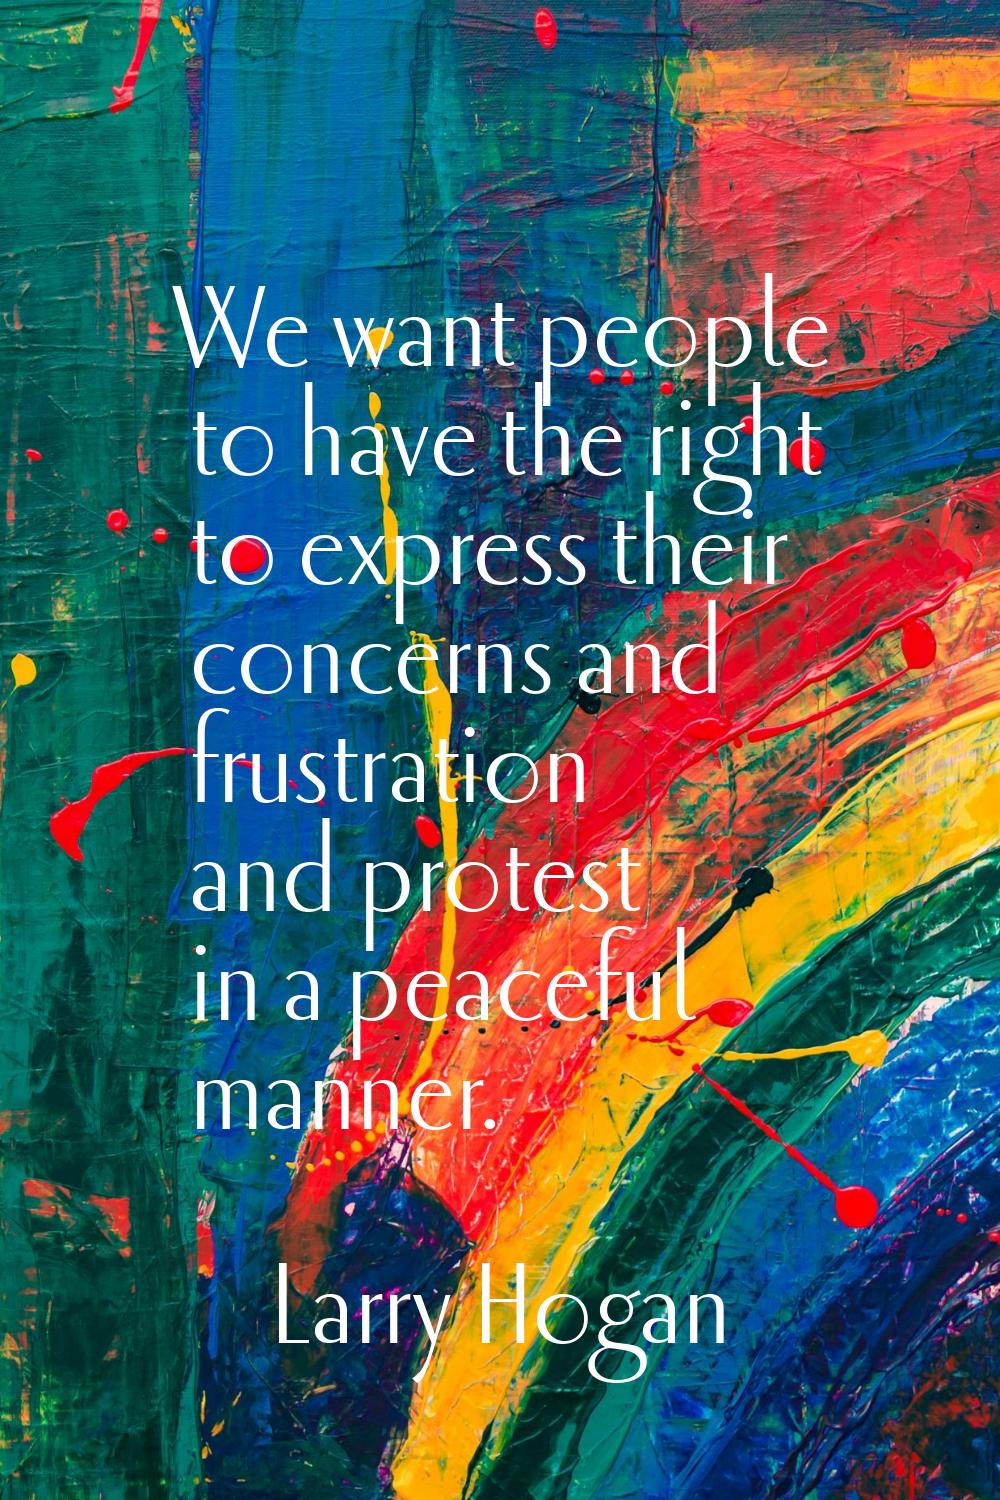 We want people to have the right to express their concerns and frustration and protest in a peacefu